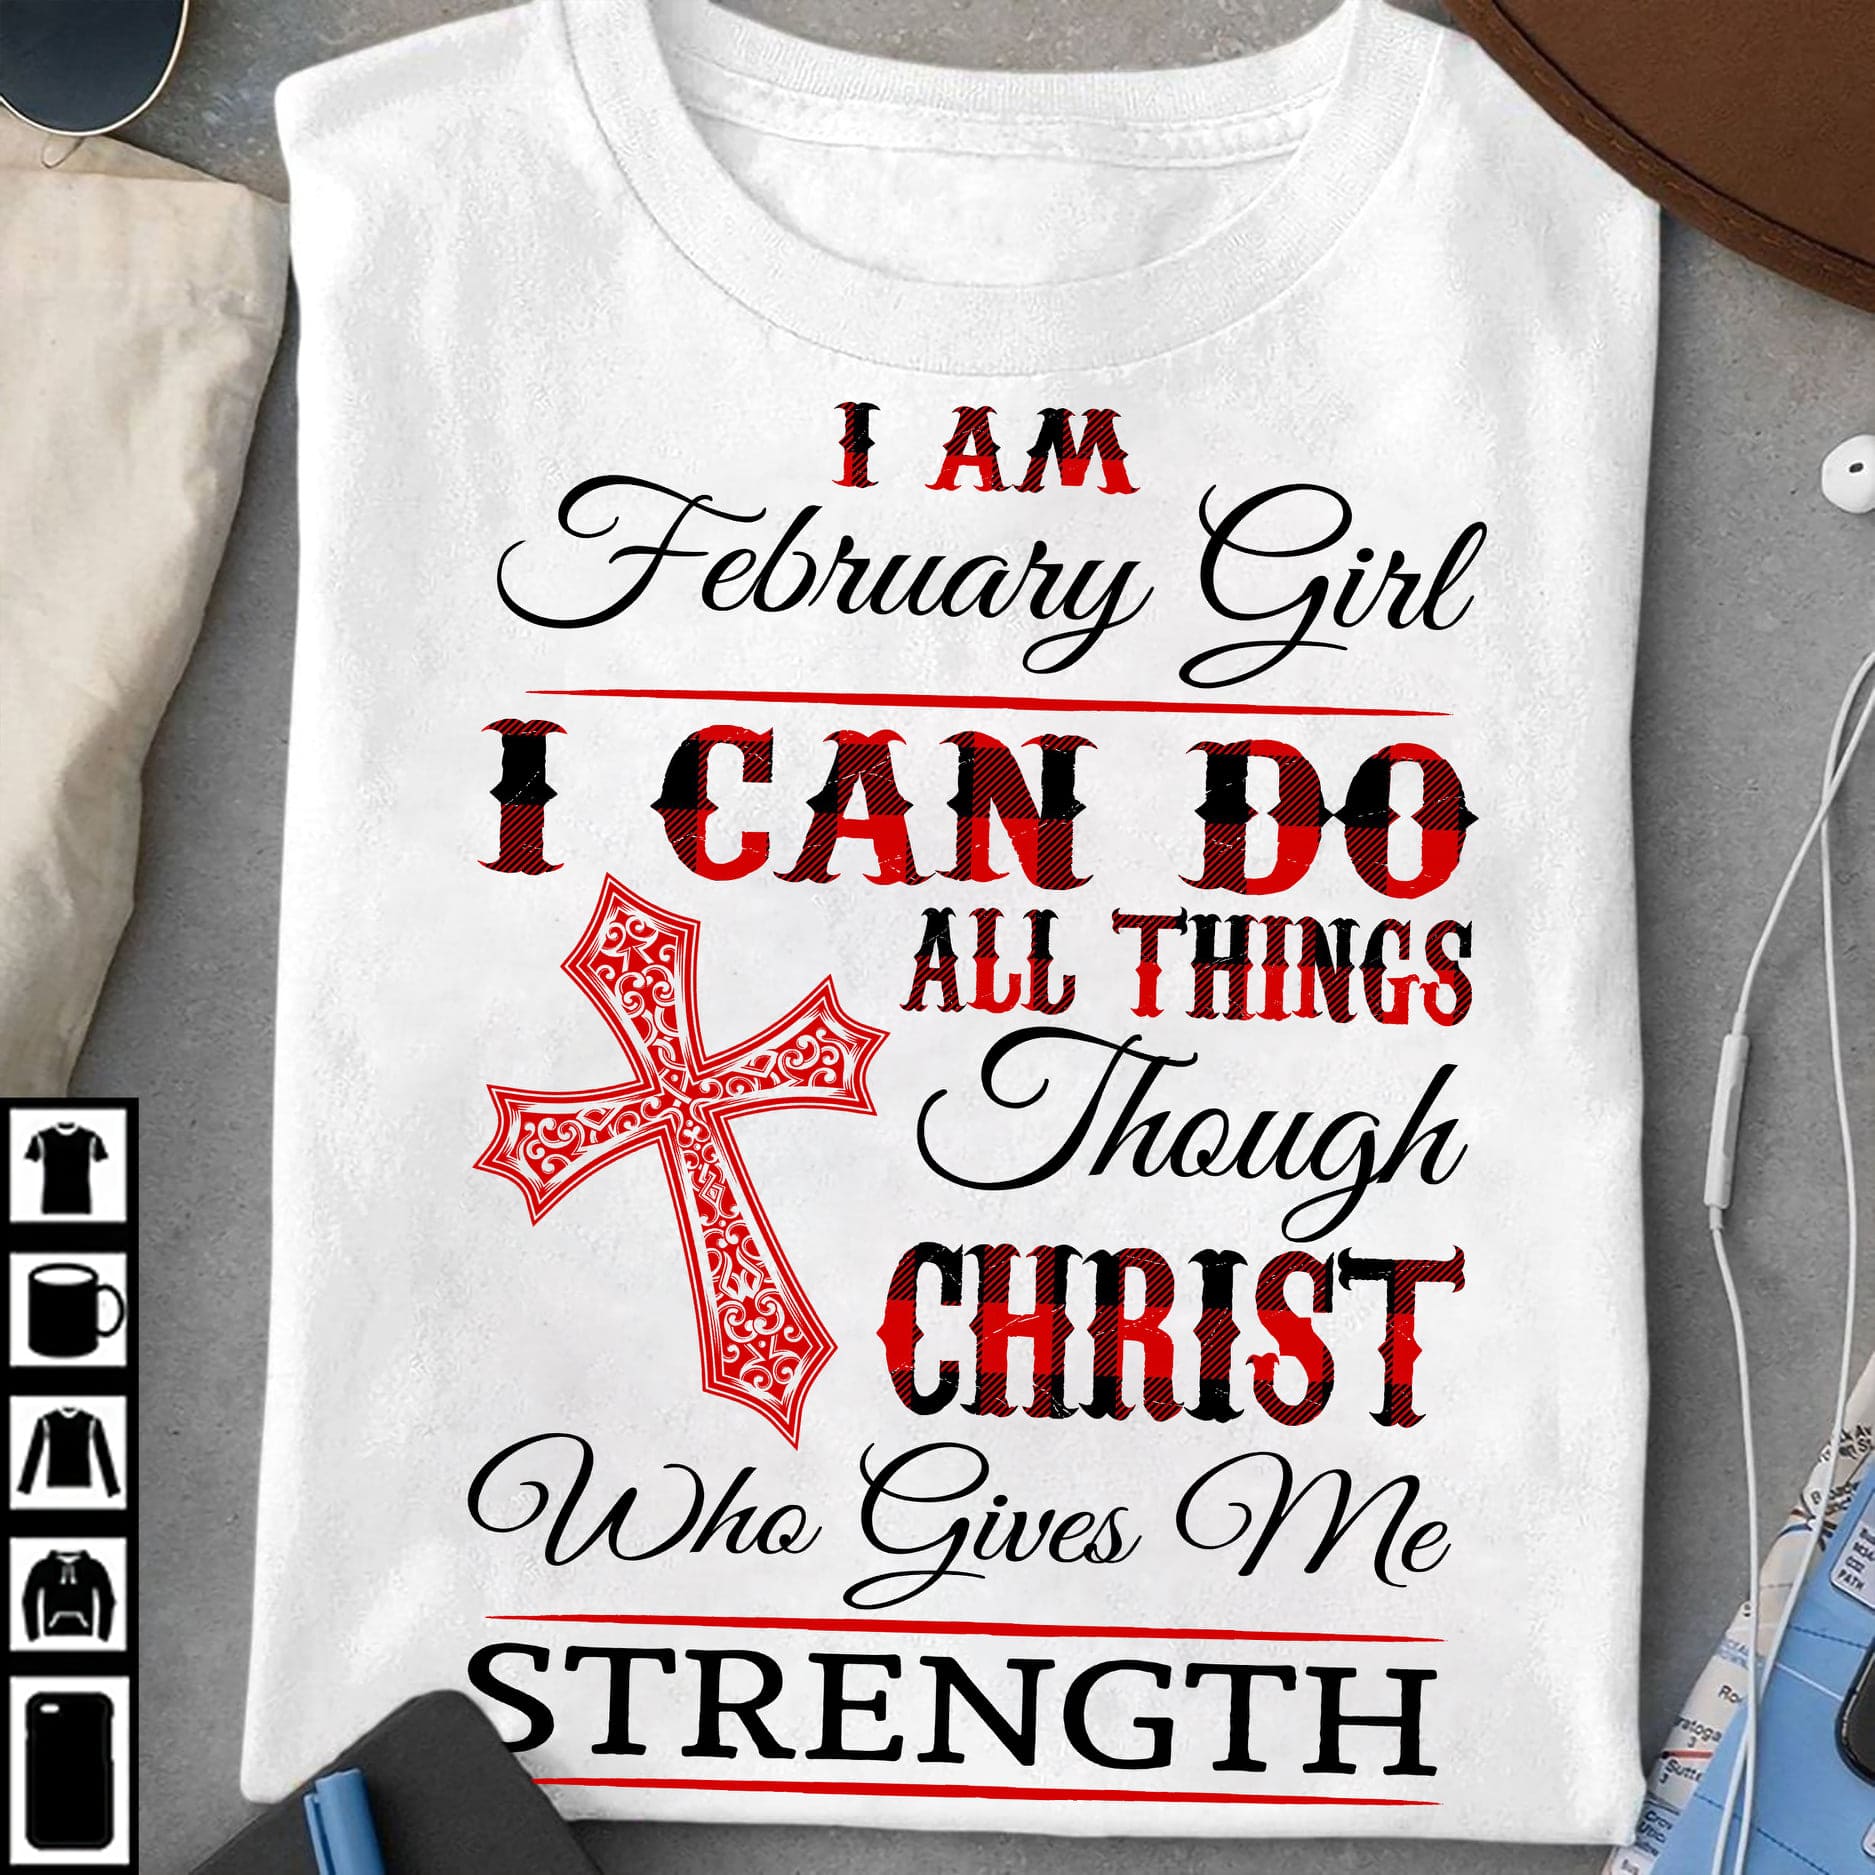 I am february girl i can do all things through christ who gives me strength